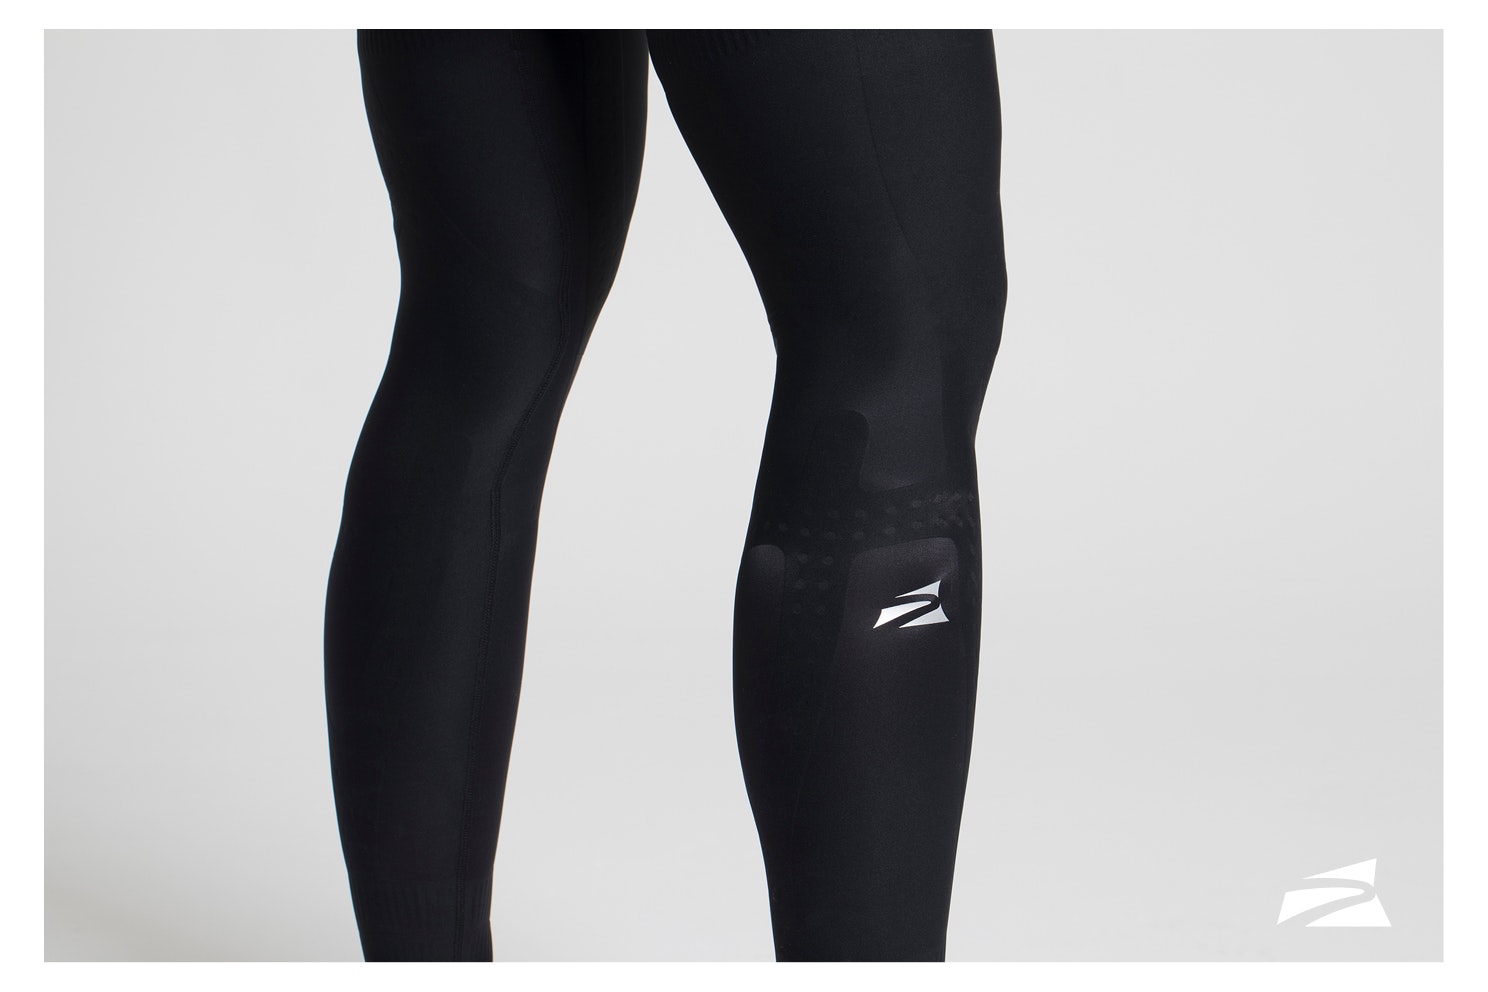 The Benefits of Compression Clothing for Runners – Enerskin